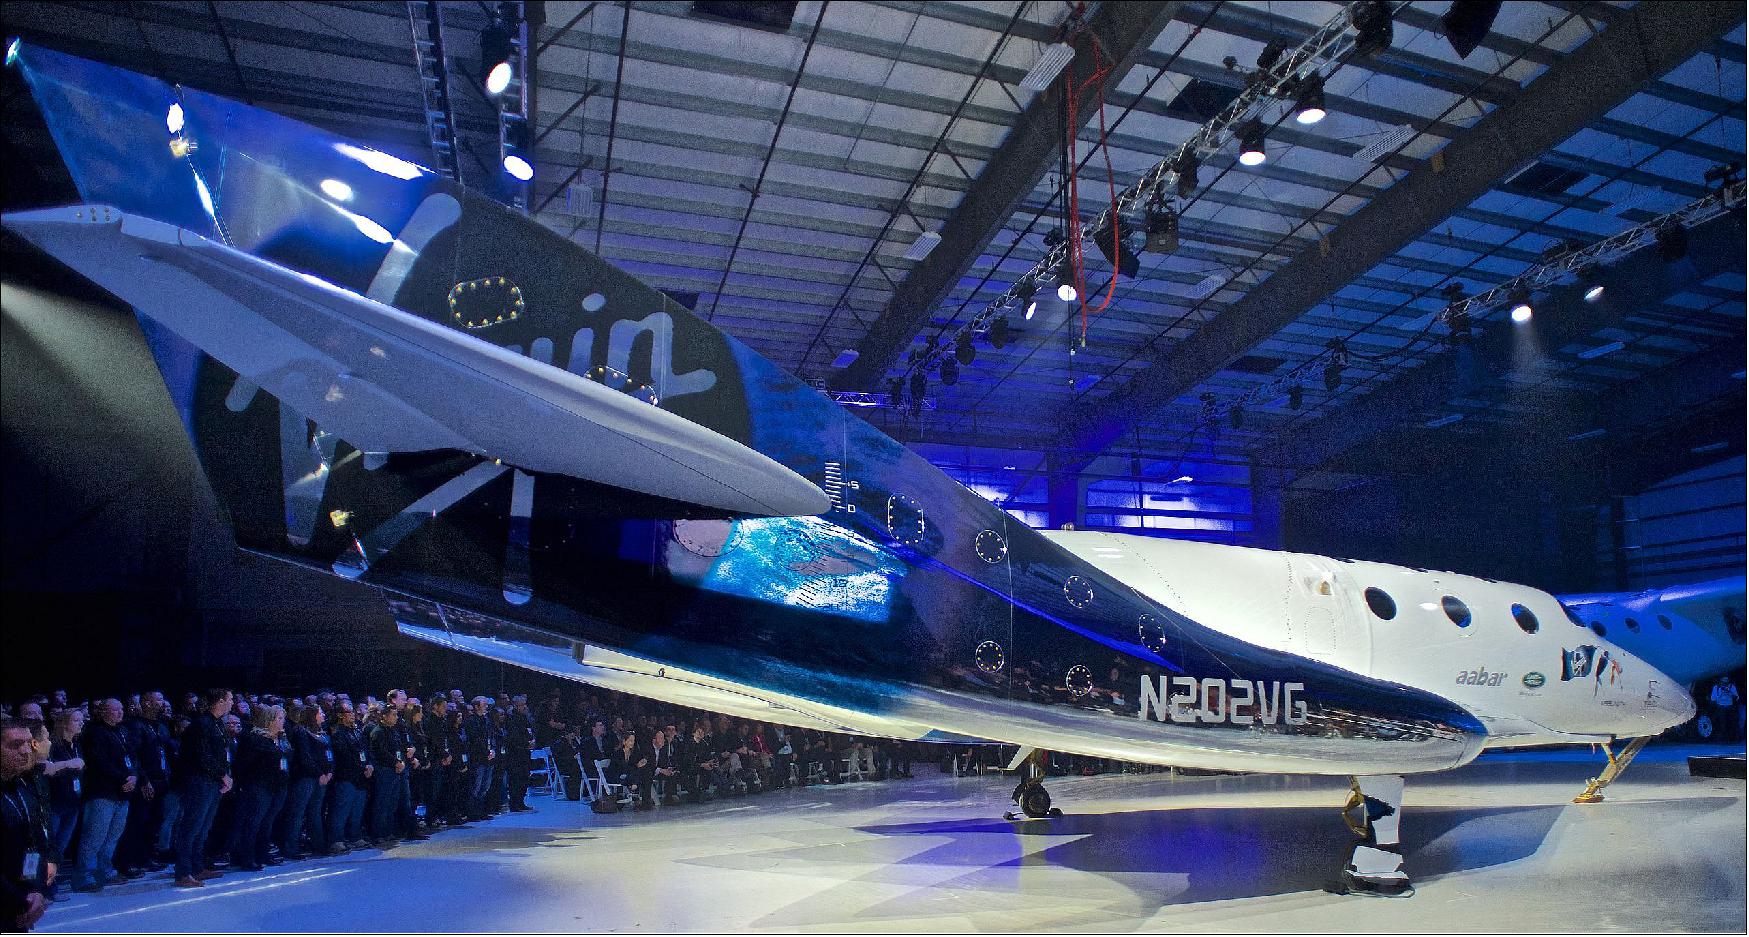 Figure 1: SpaceShipTwo "Unity" at rollout event on 19 February 2016 in Virgin Galactic FAITH hangar, Mojave, California, USA. VSS Unity (image credit: Virgin Galactic)